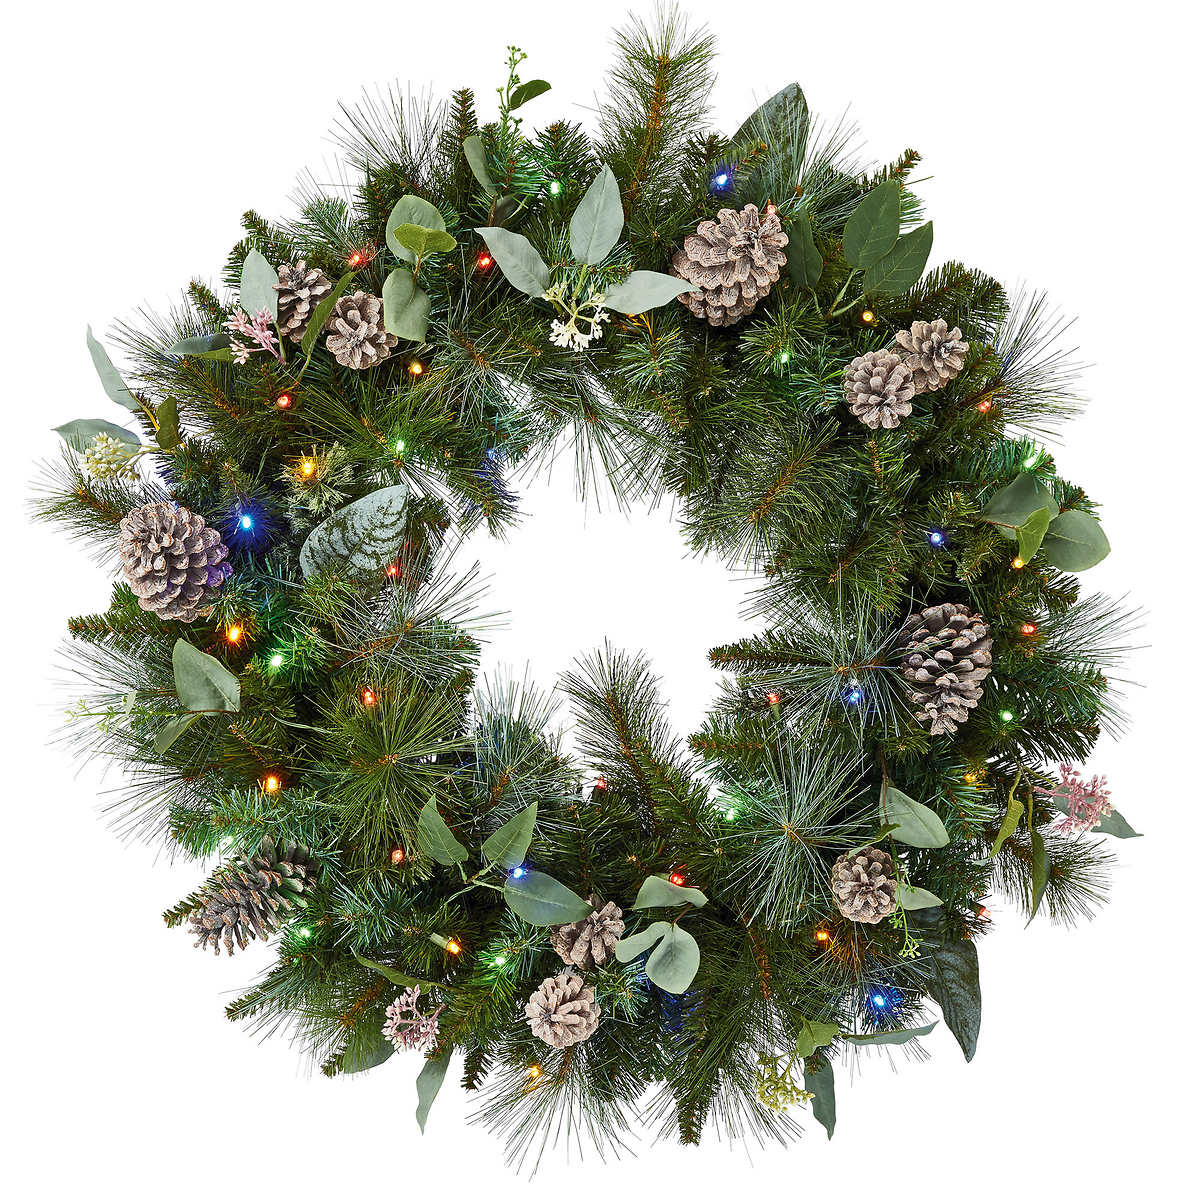 32" MIXED GREENERY WREATH WITH LED LIGHTS